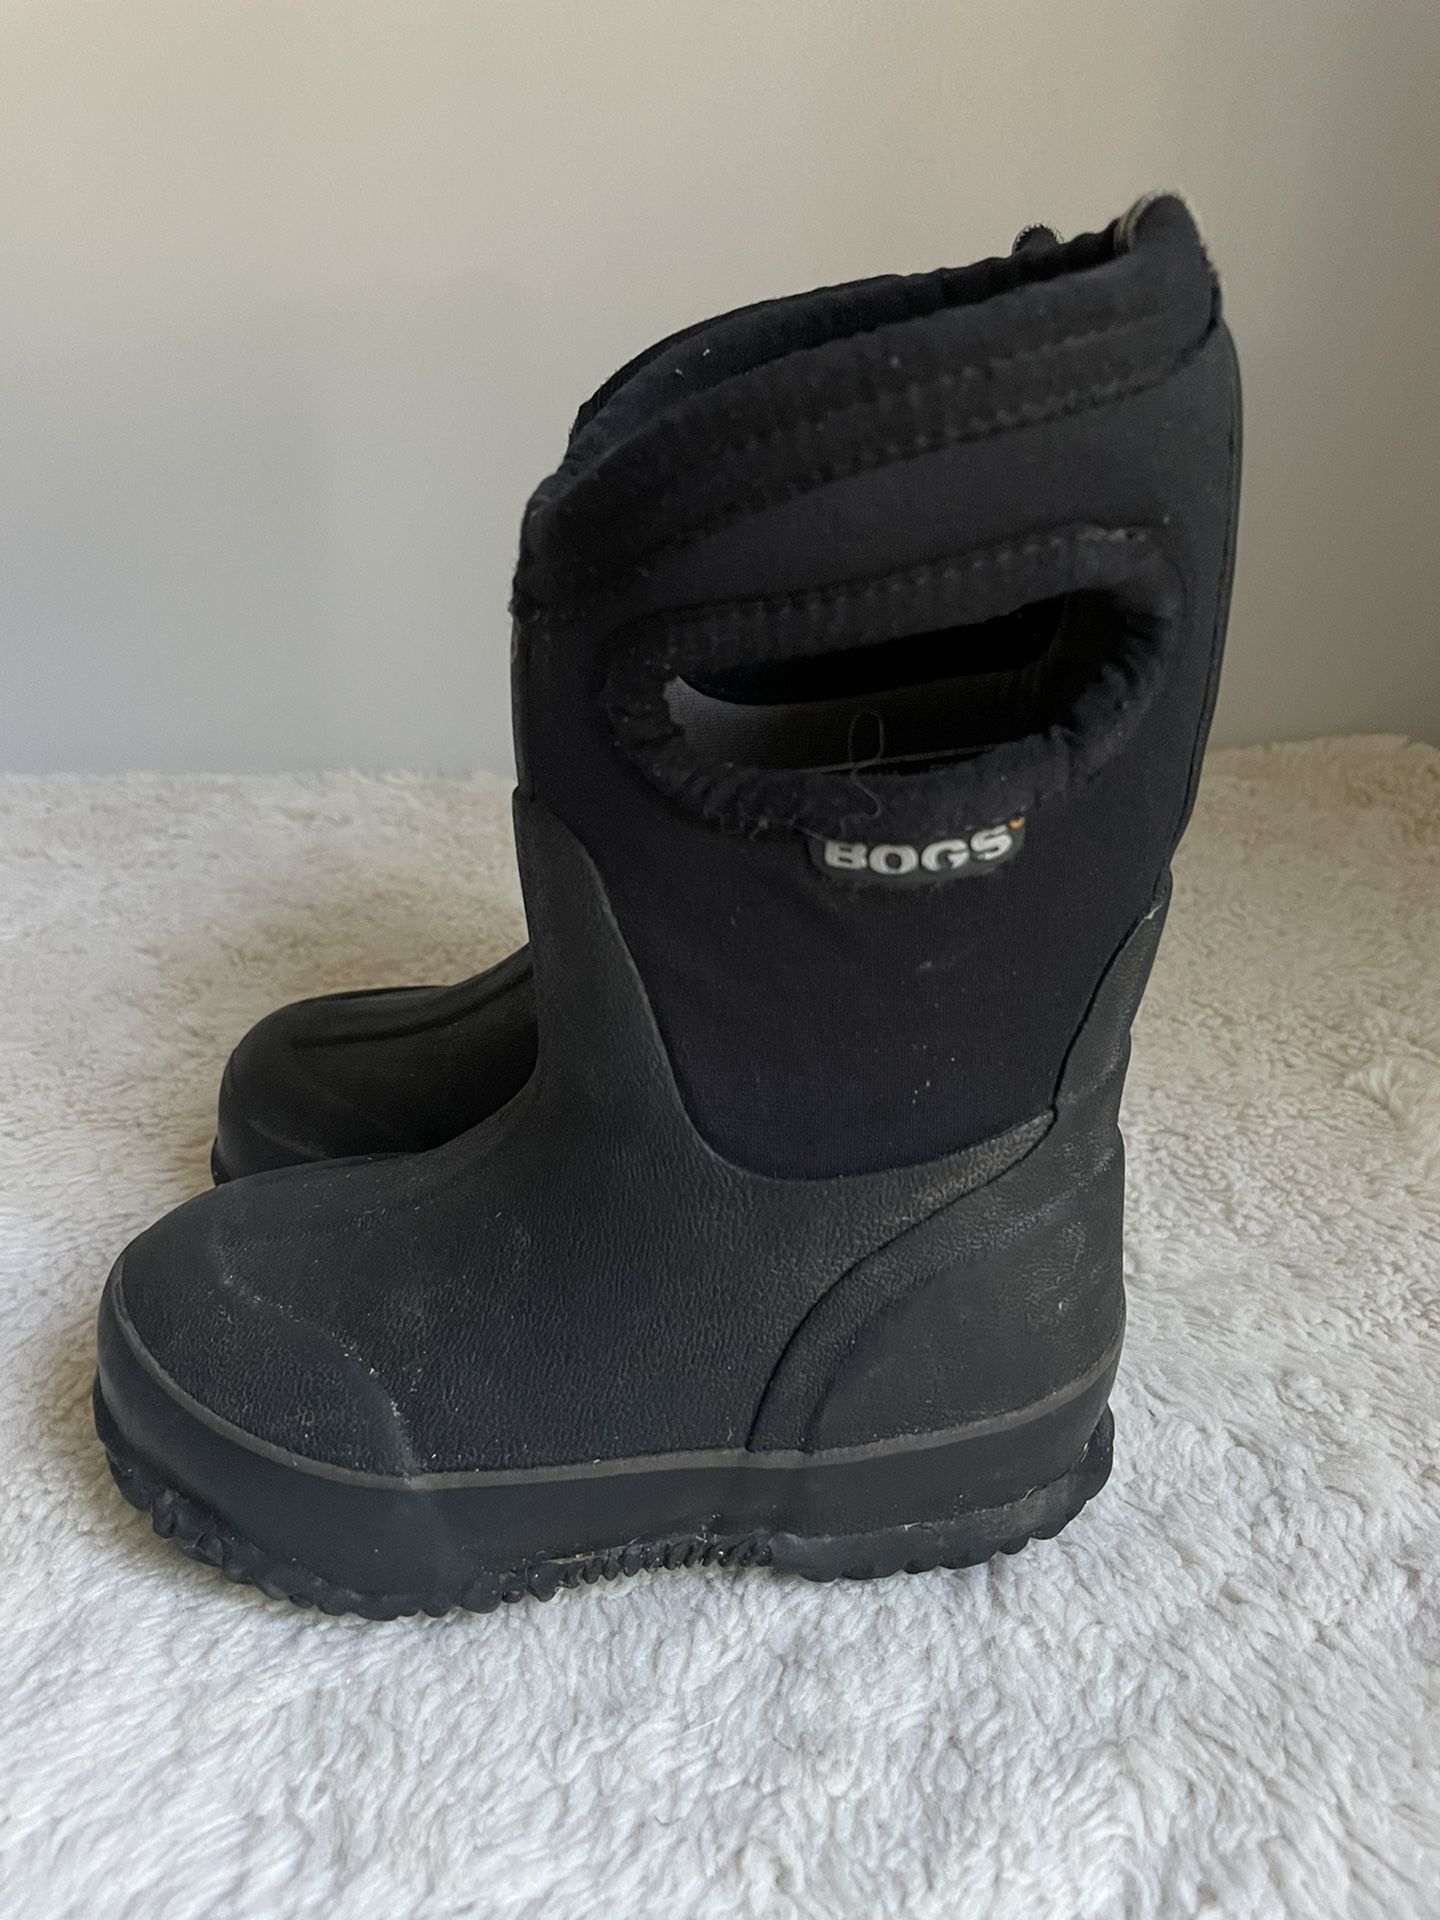 Toddler Boys Bogs Winter Snow Boots Little Kids Size 7 Toddler 